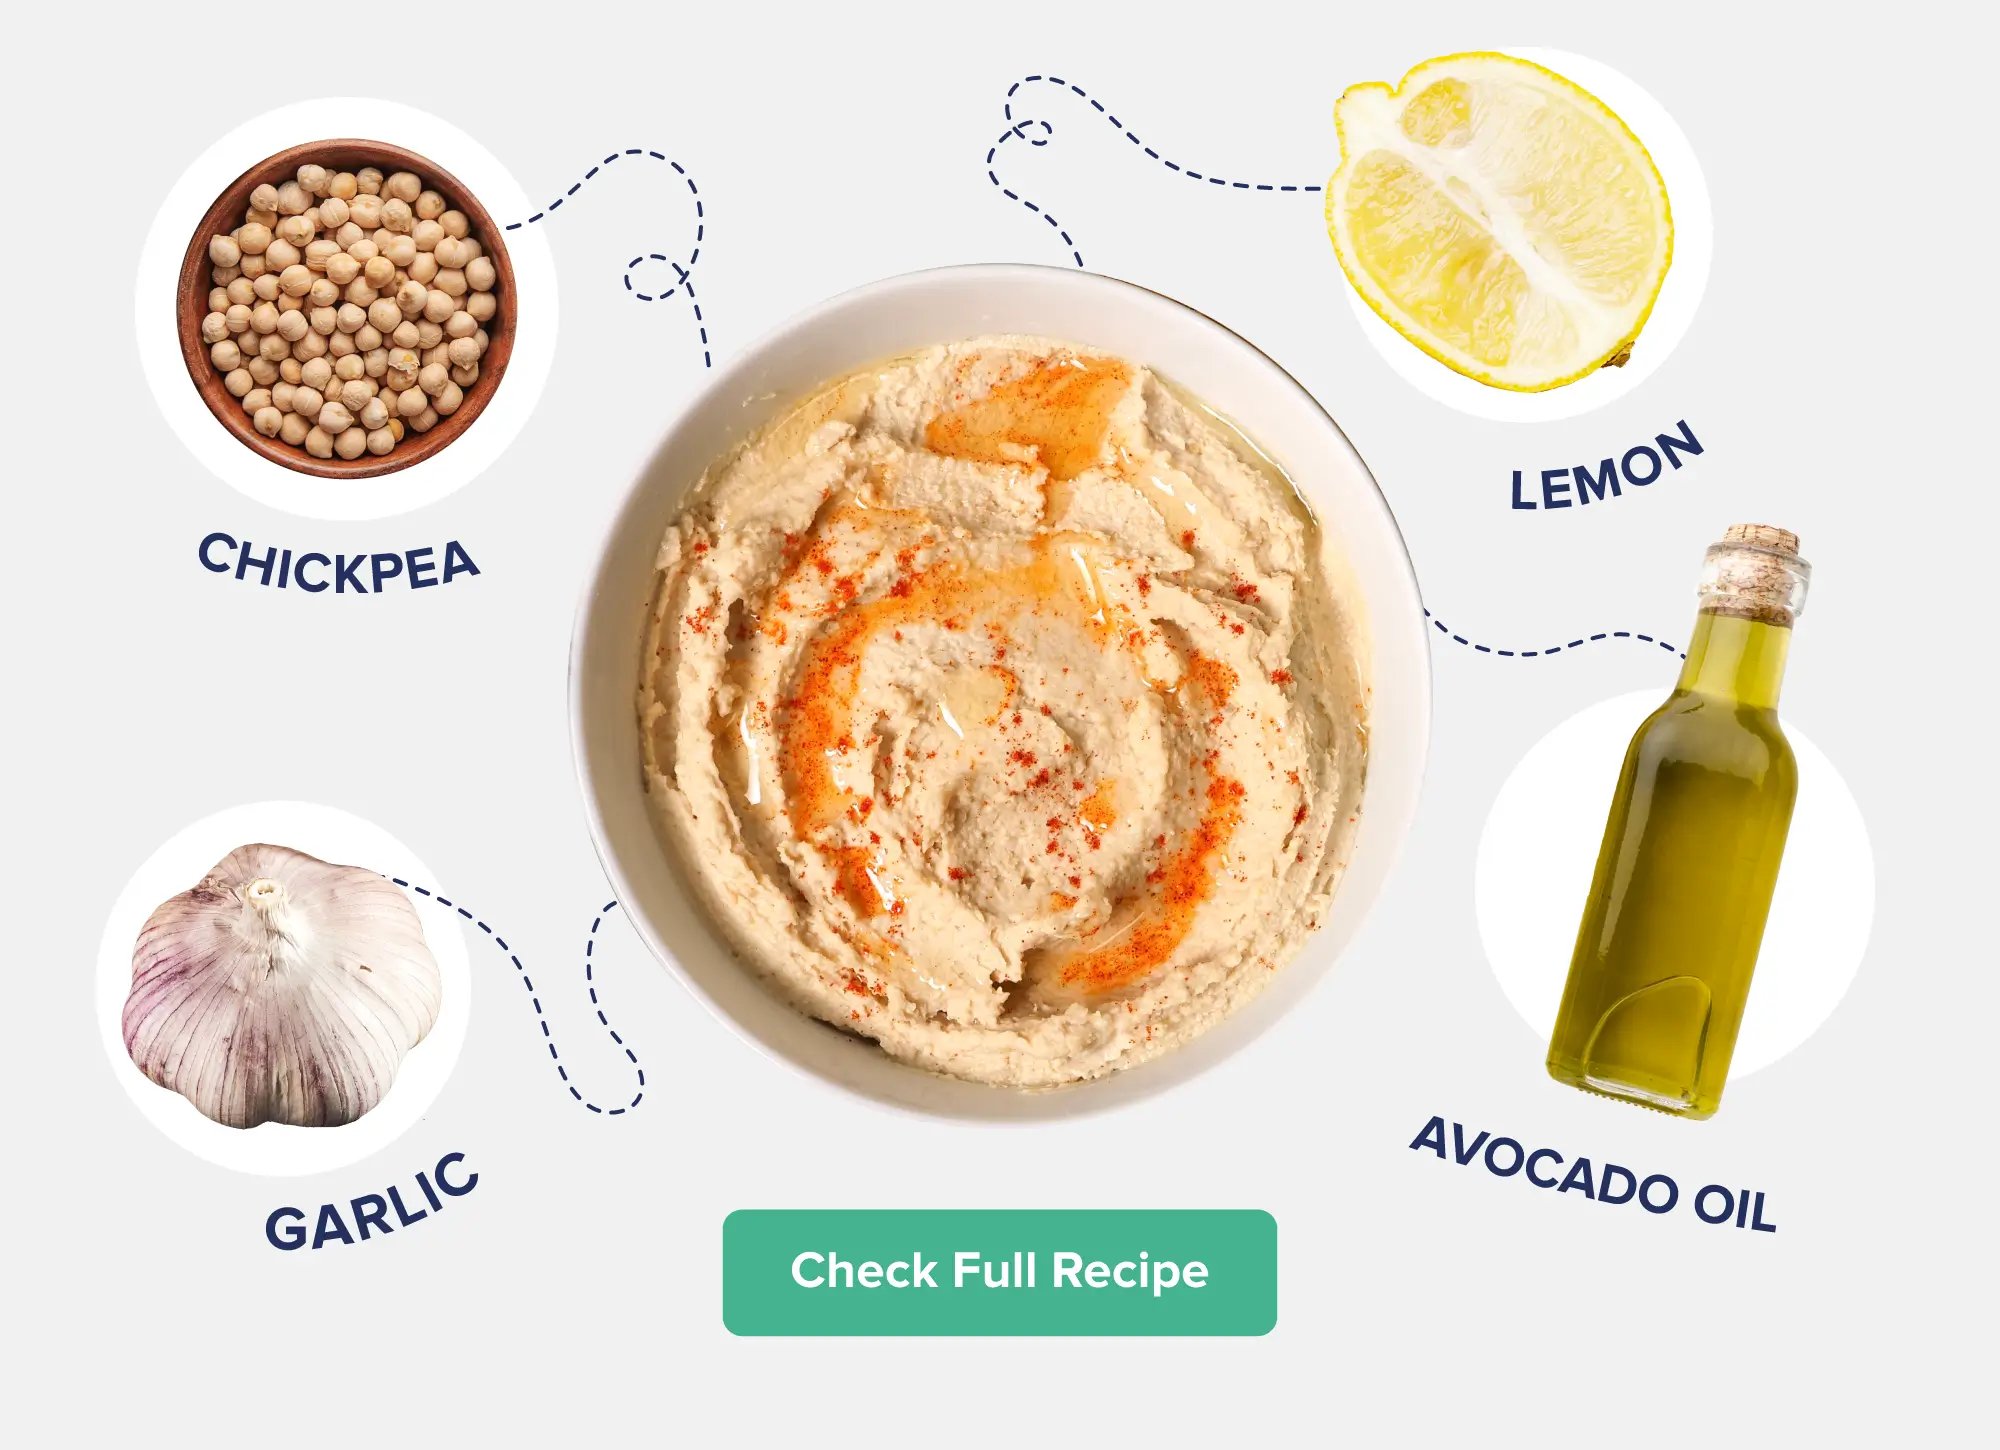 A graphic showing a bowl of hummus with images of the ingredients surrounding it, including lemon, chickpea, garlic, and avocado oil